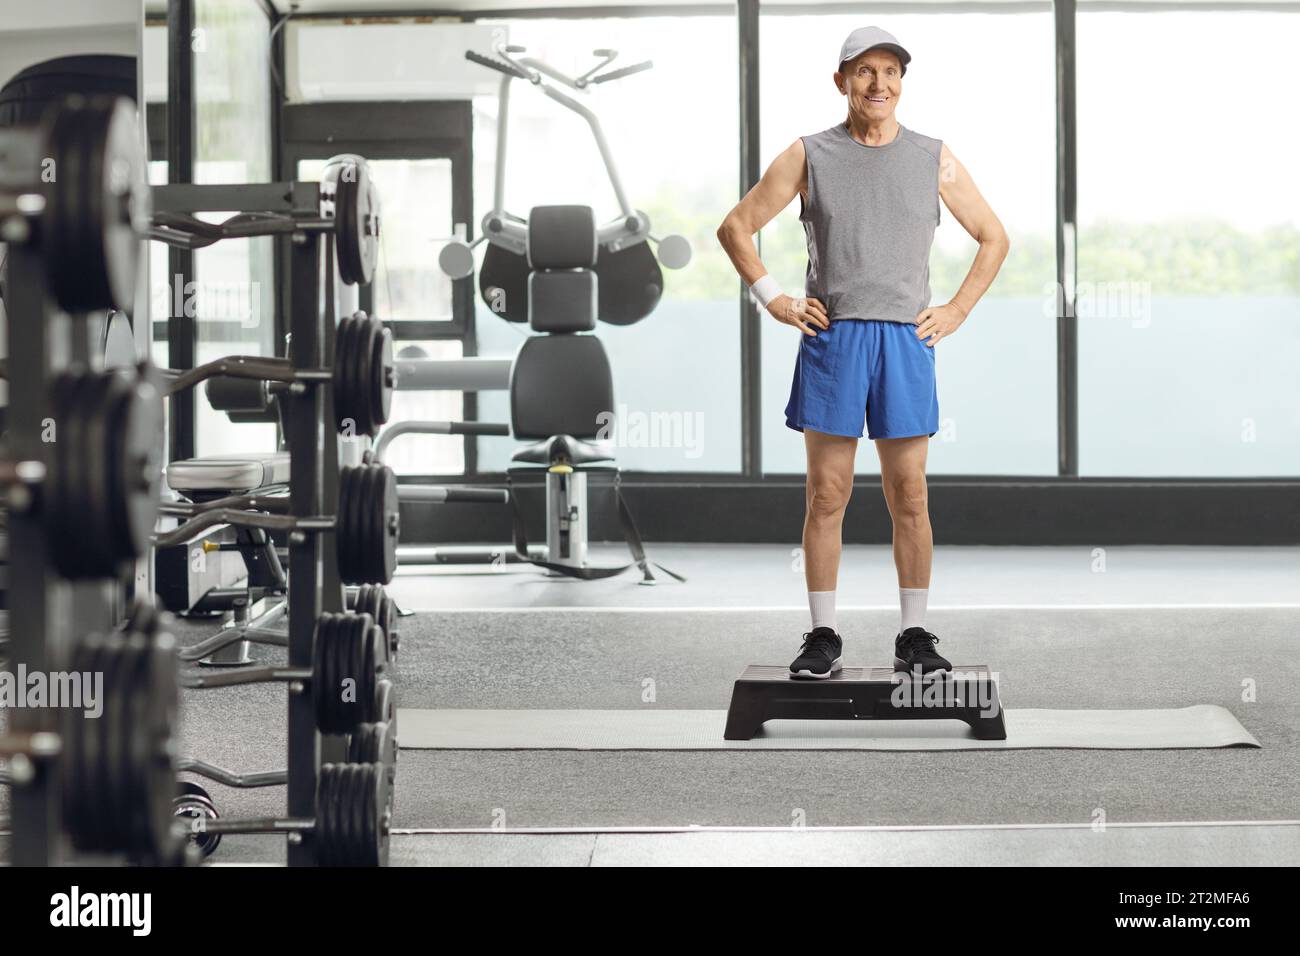 Full length portrait of an elderly man in sportswear standing on a step aerobic platform at a gym Stock Photo